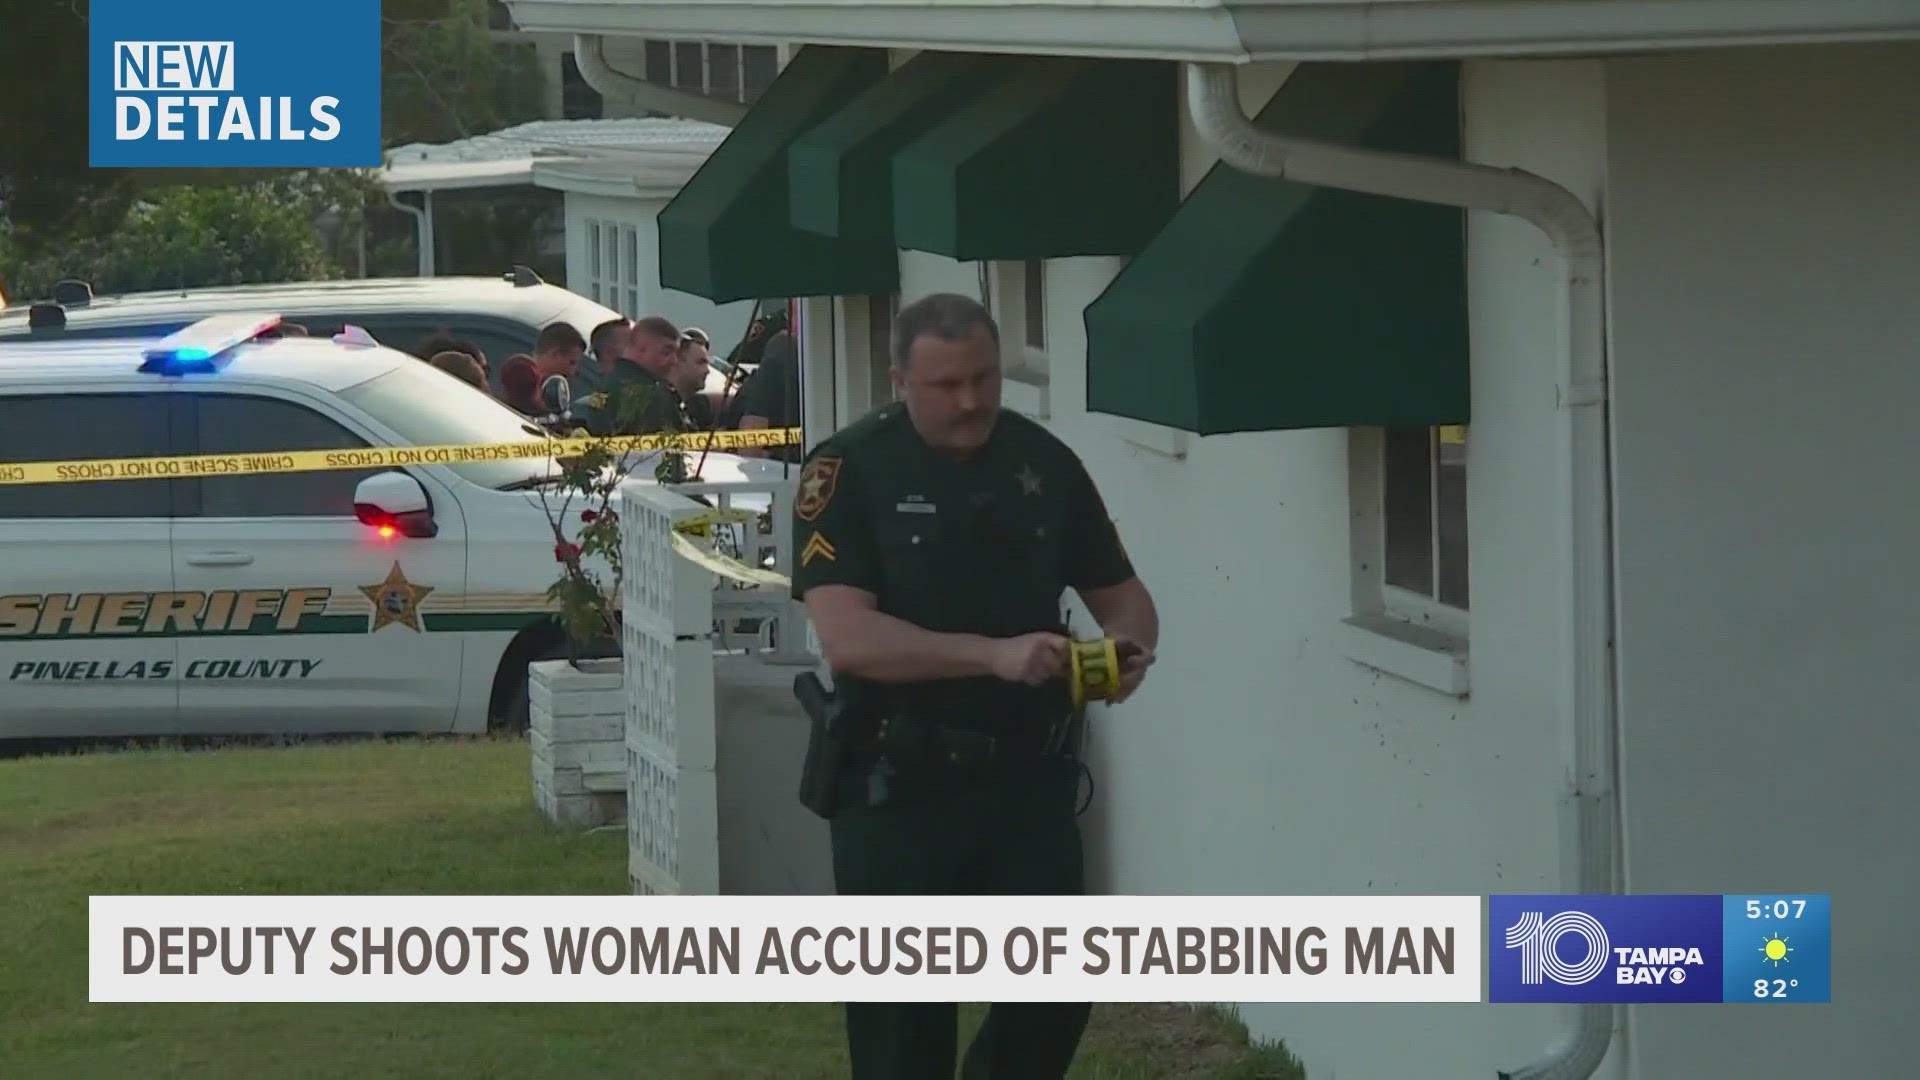 Both the 44-year-old suspect and the 70-year-old boyfriend she allegedly stabbed remain in the hospital.